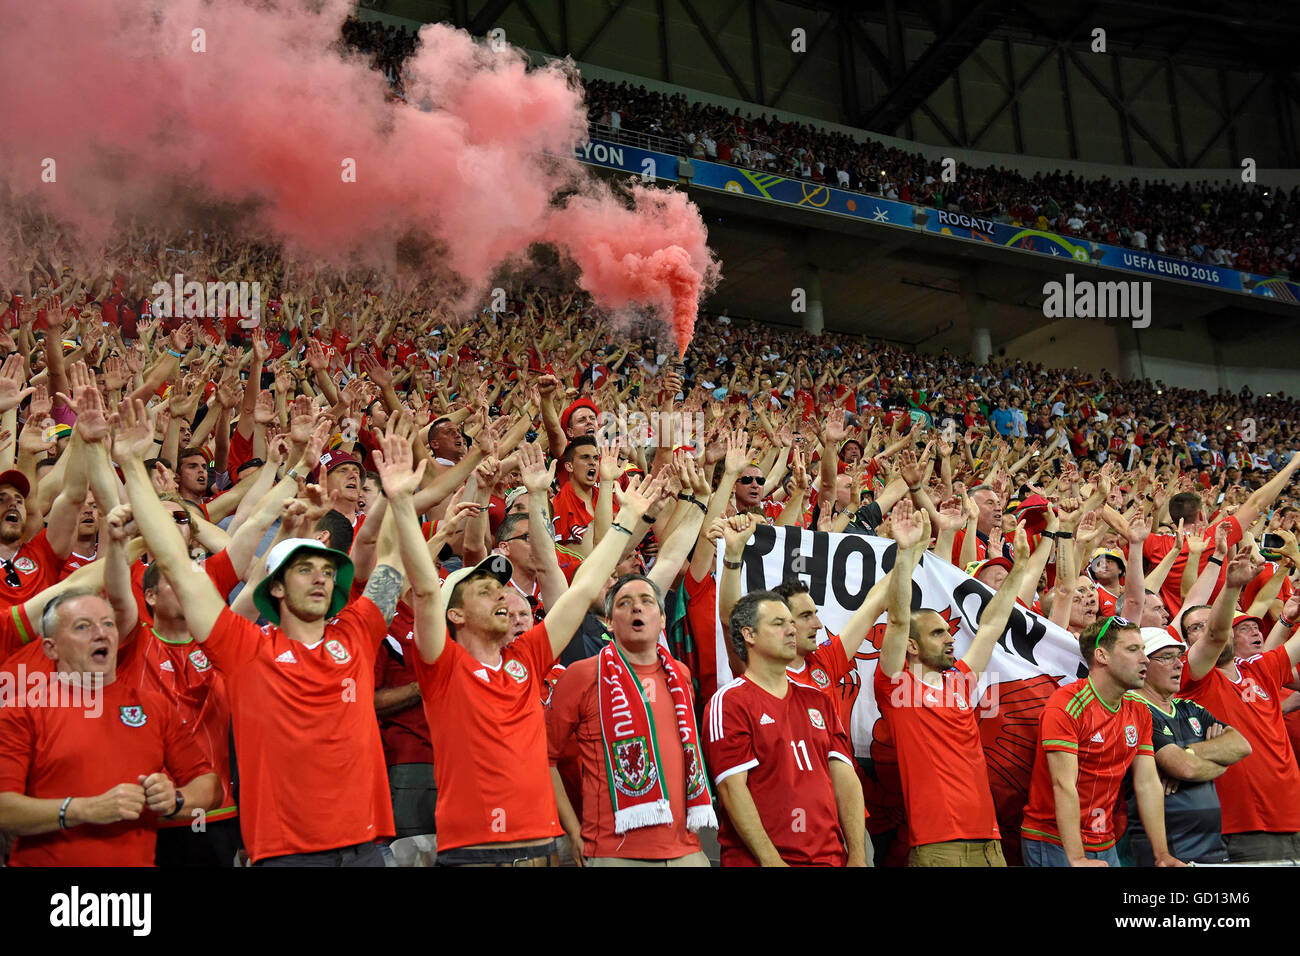 Welsh fans cheer the team after defeat in the Euro 2016 Semi-Final between Portugal and Wales at the Parc Olympique Lyonnais in Lyon, France this evening. Stock Photo